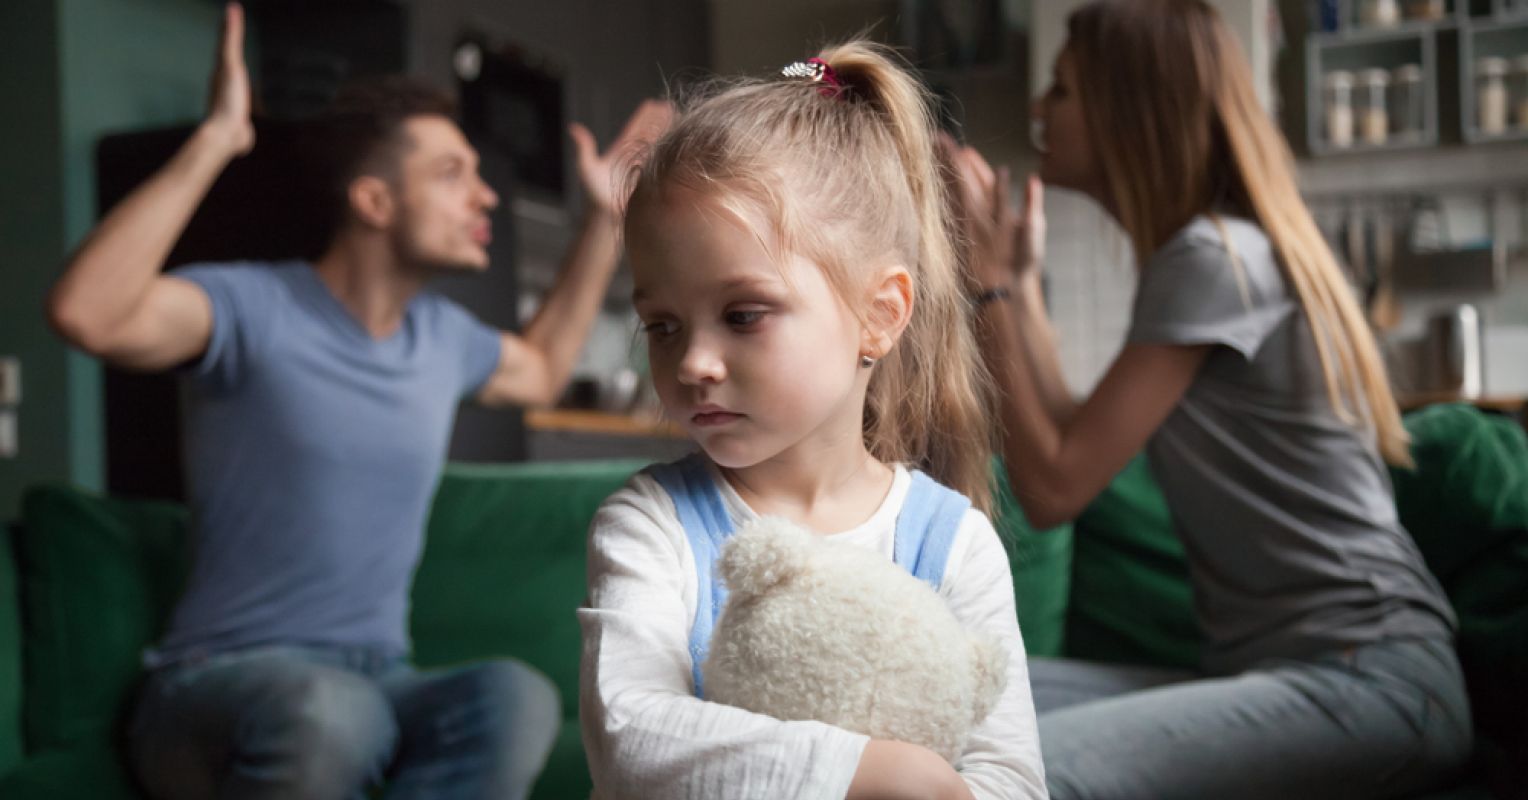 The Impact of Divorce on Children and Families